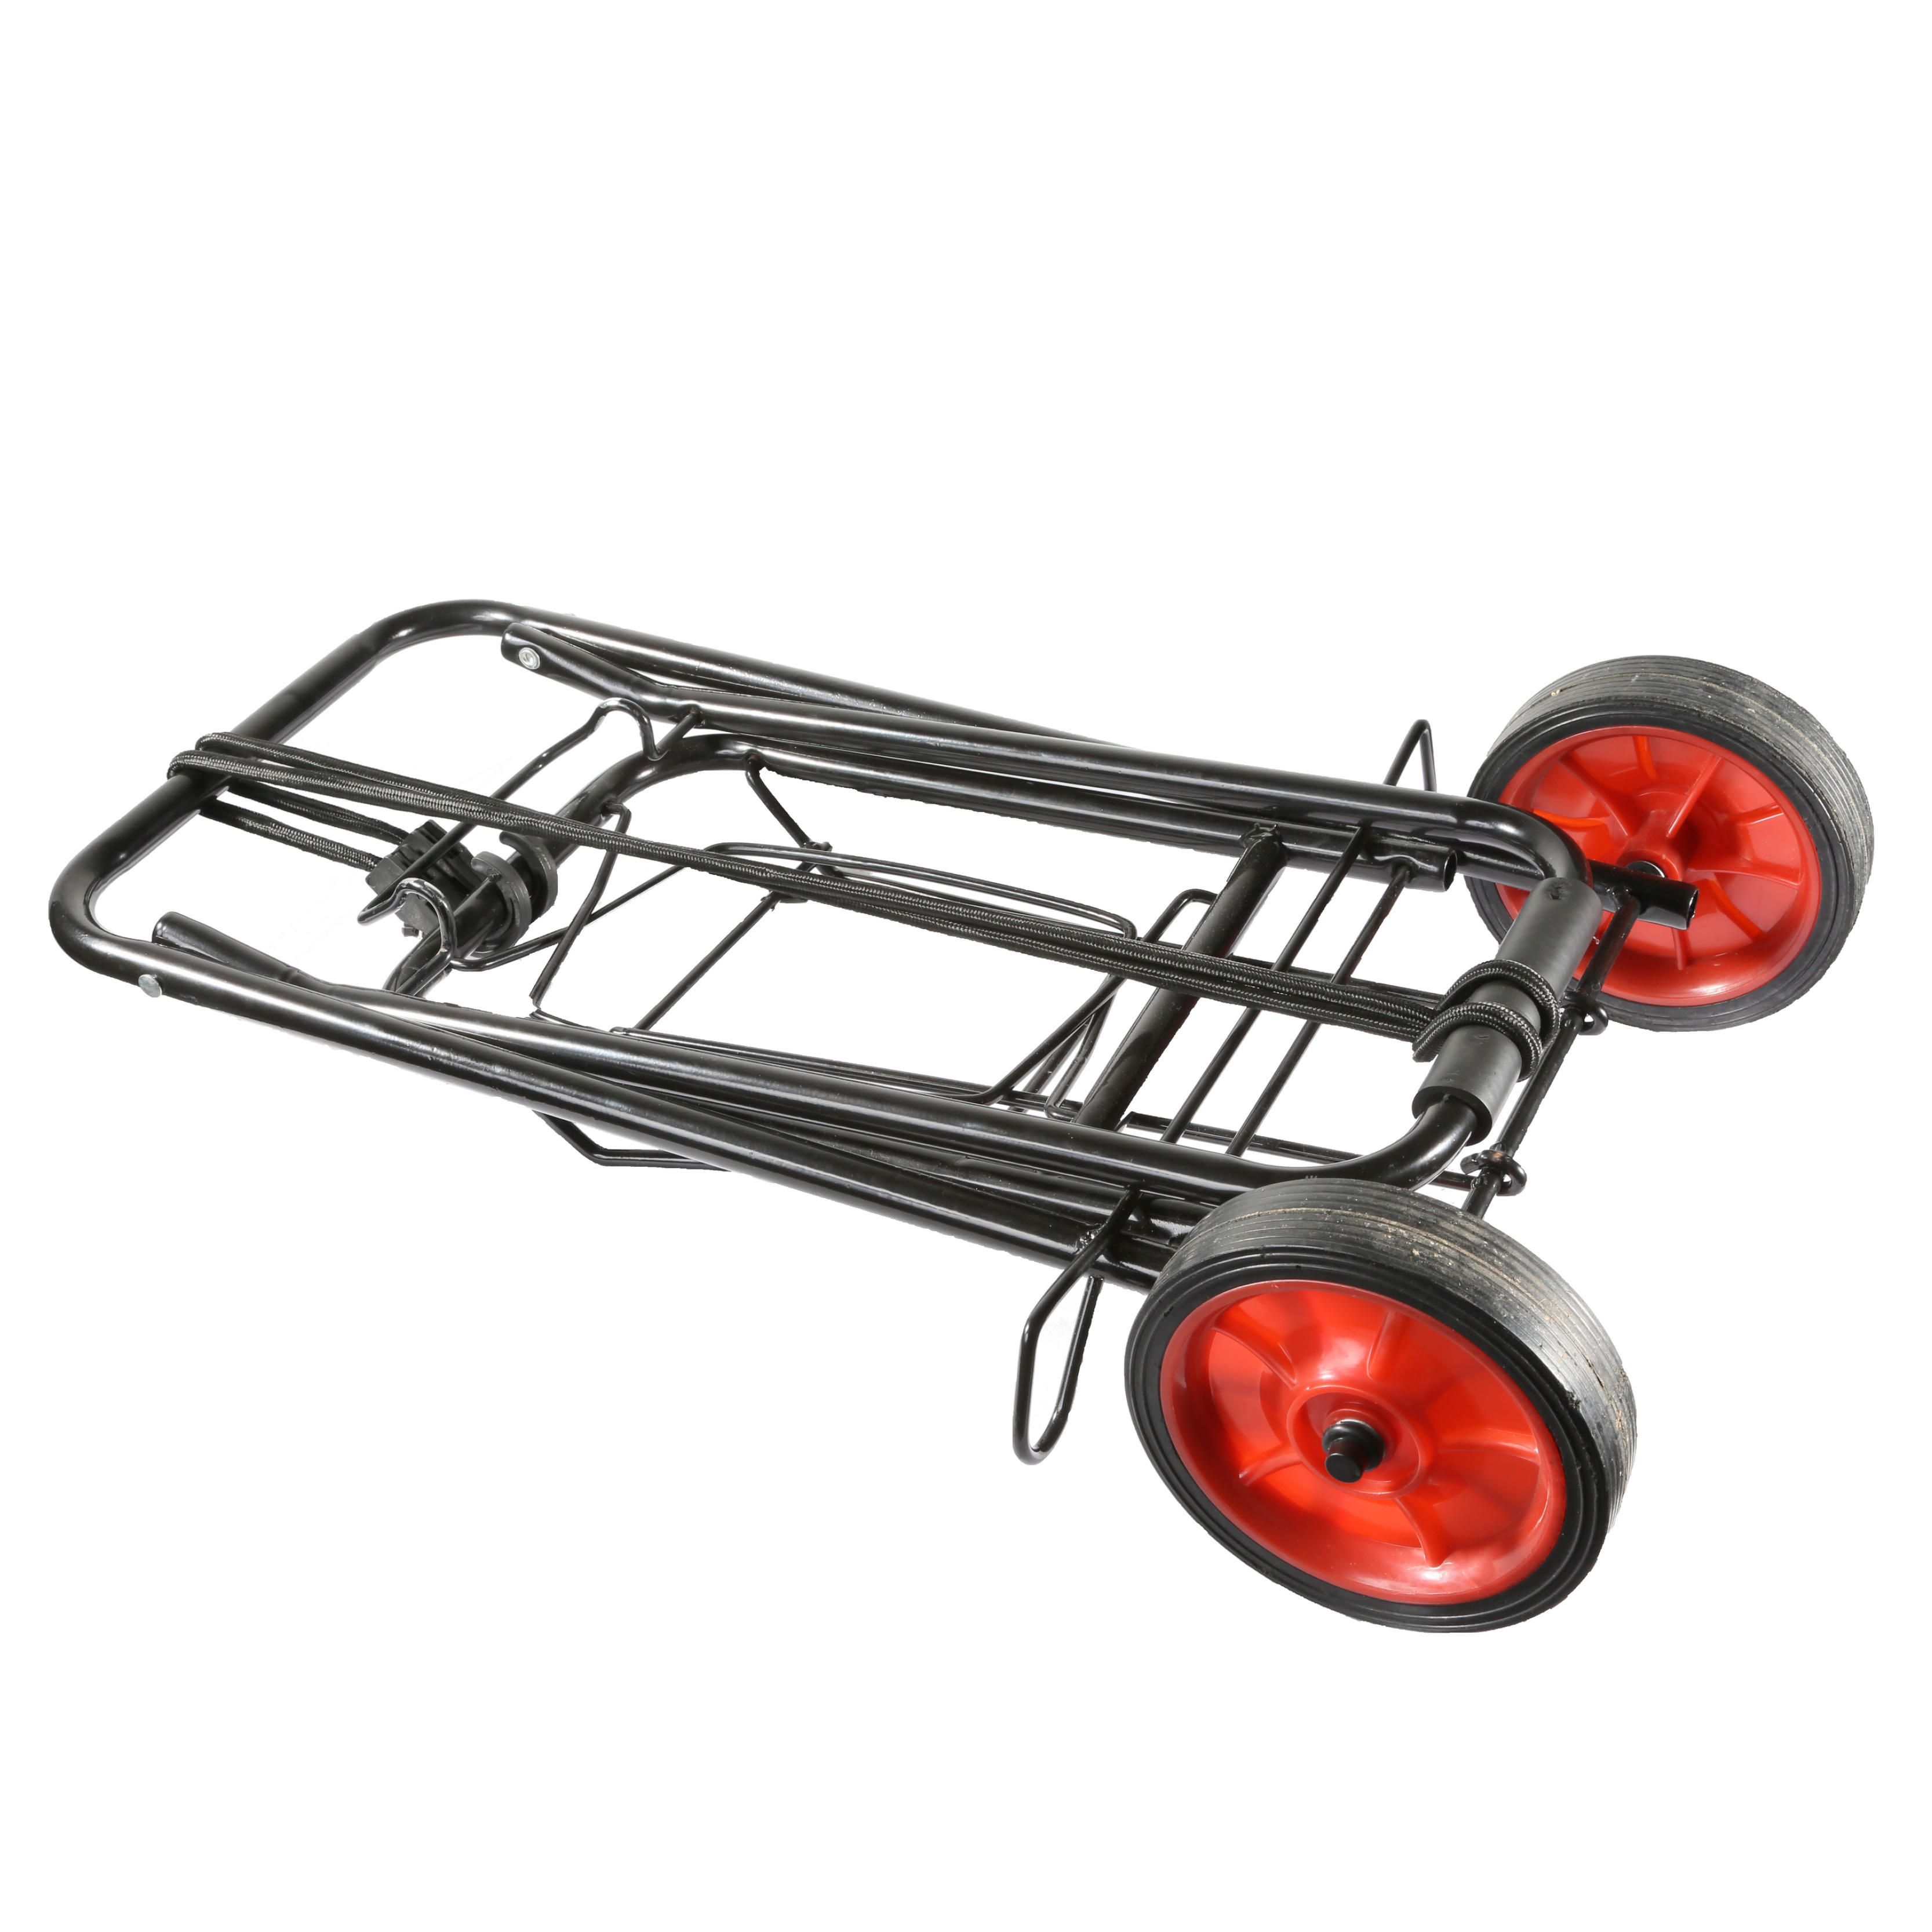 FOLDING TROLLEY FOR TRANSPORTING 